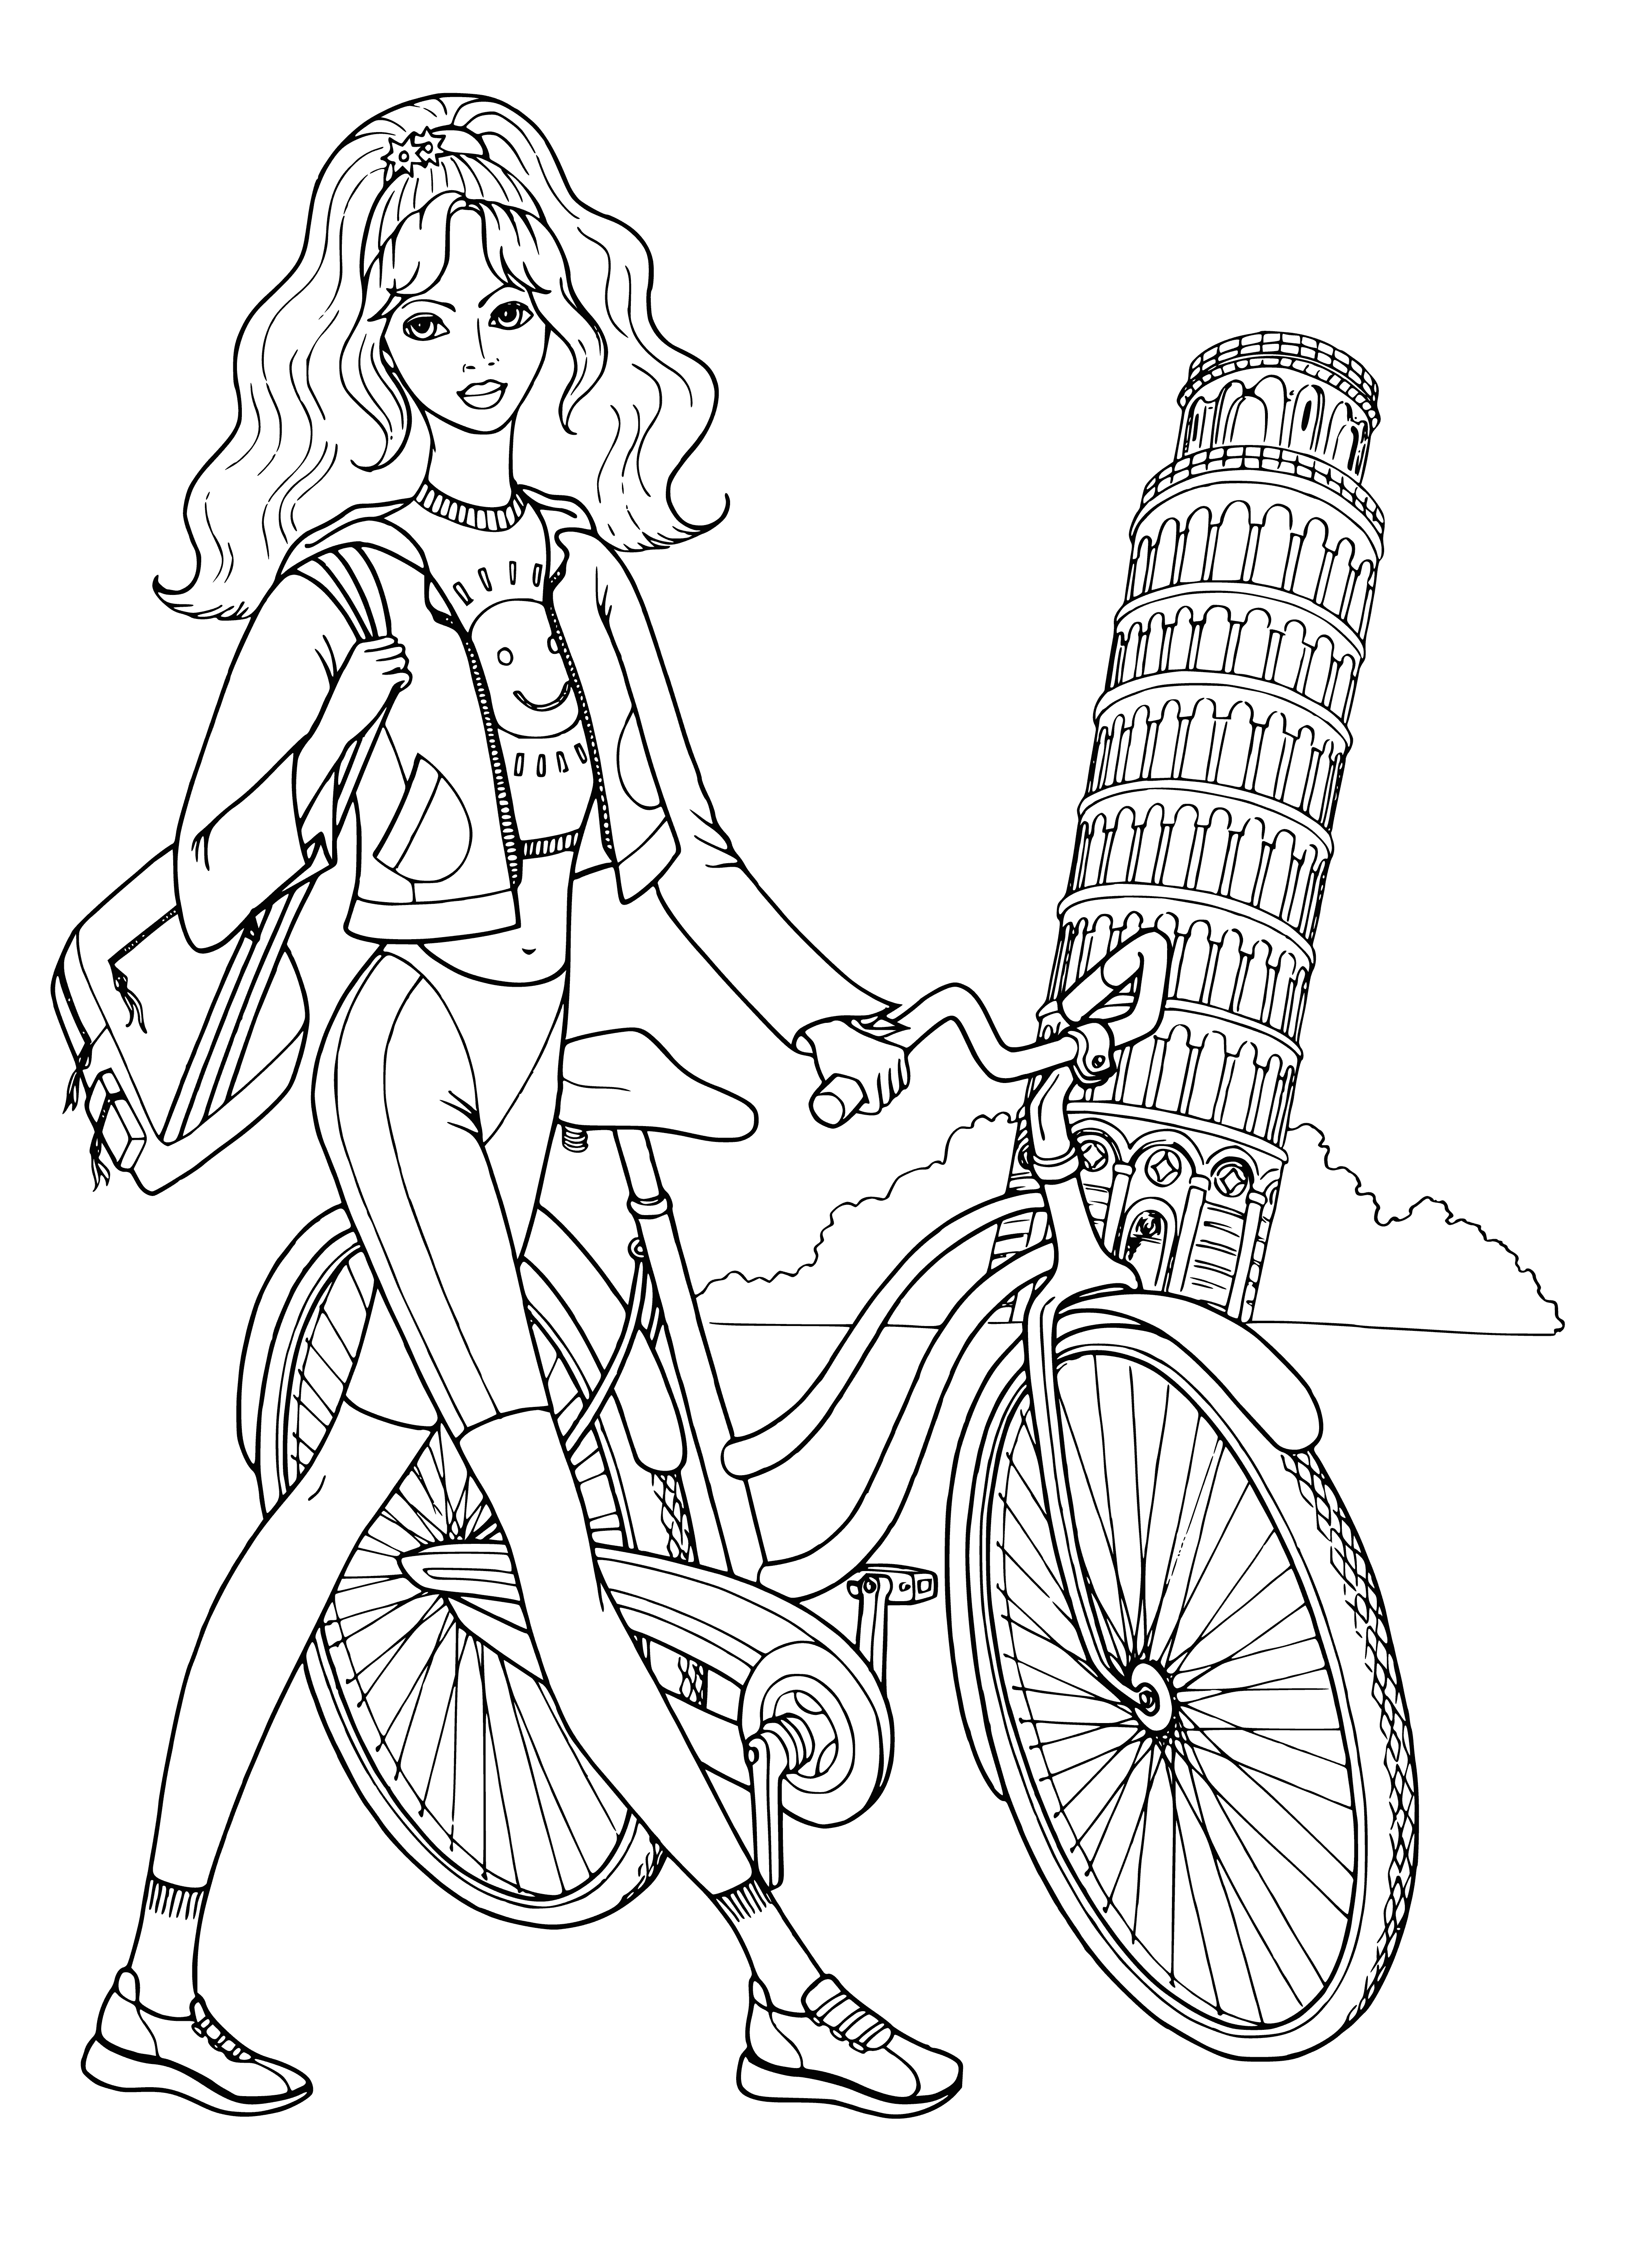 Girl with a bike coloring page